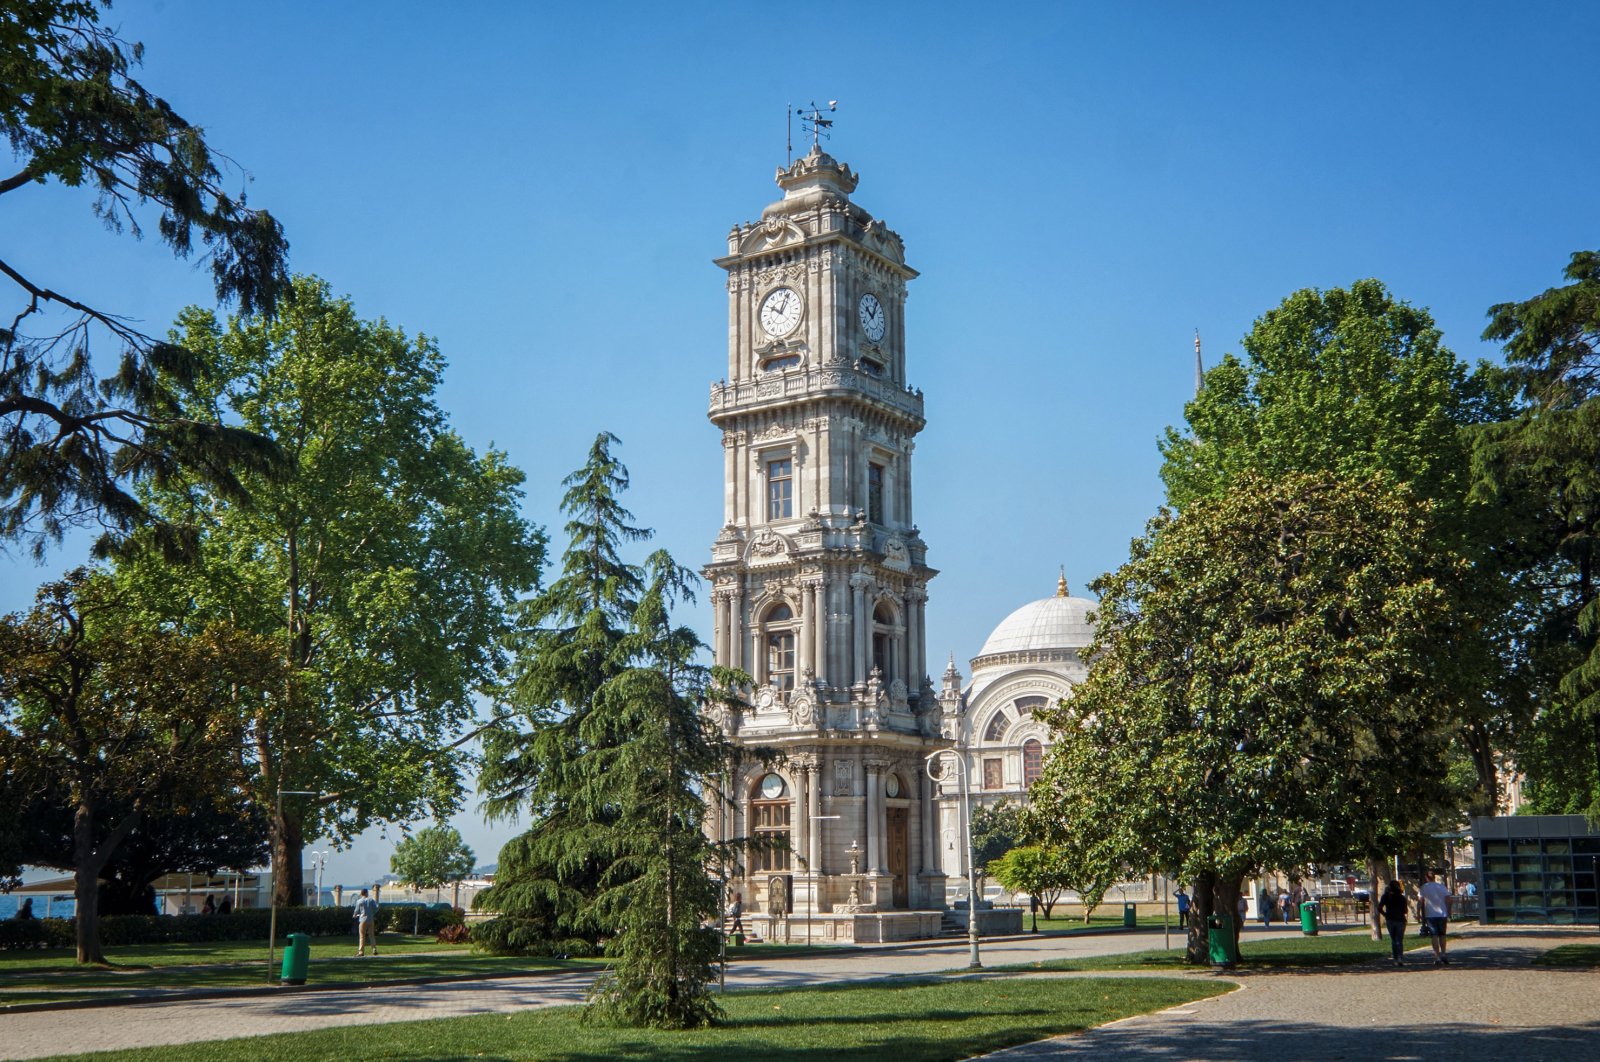 The Dolmabahçe clock tower in Istanbul, Turkey. (Photo by Shutterstock)